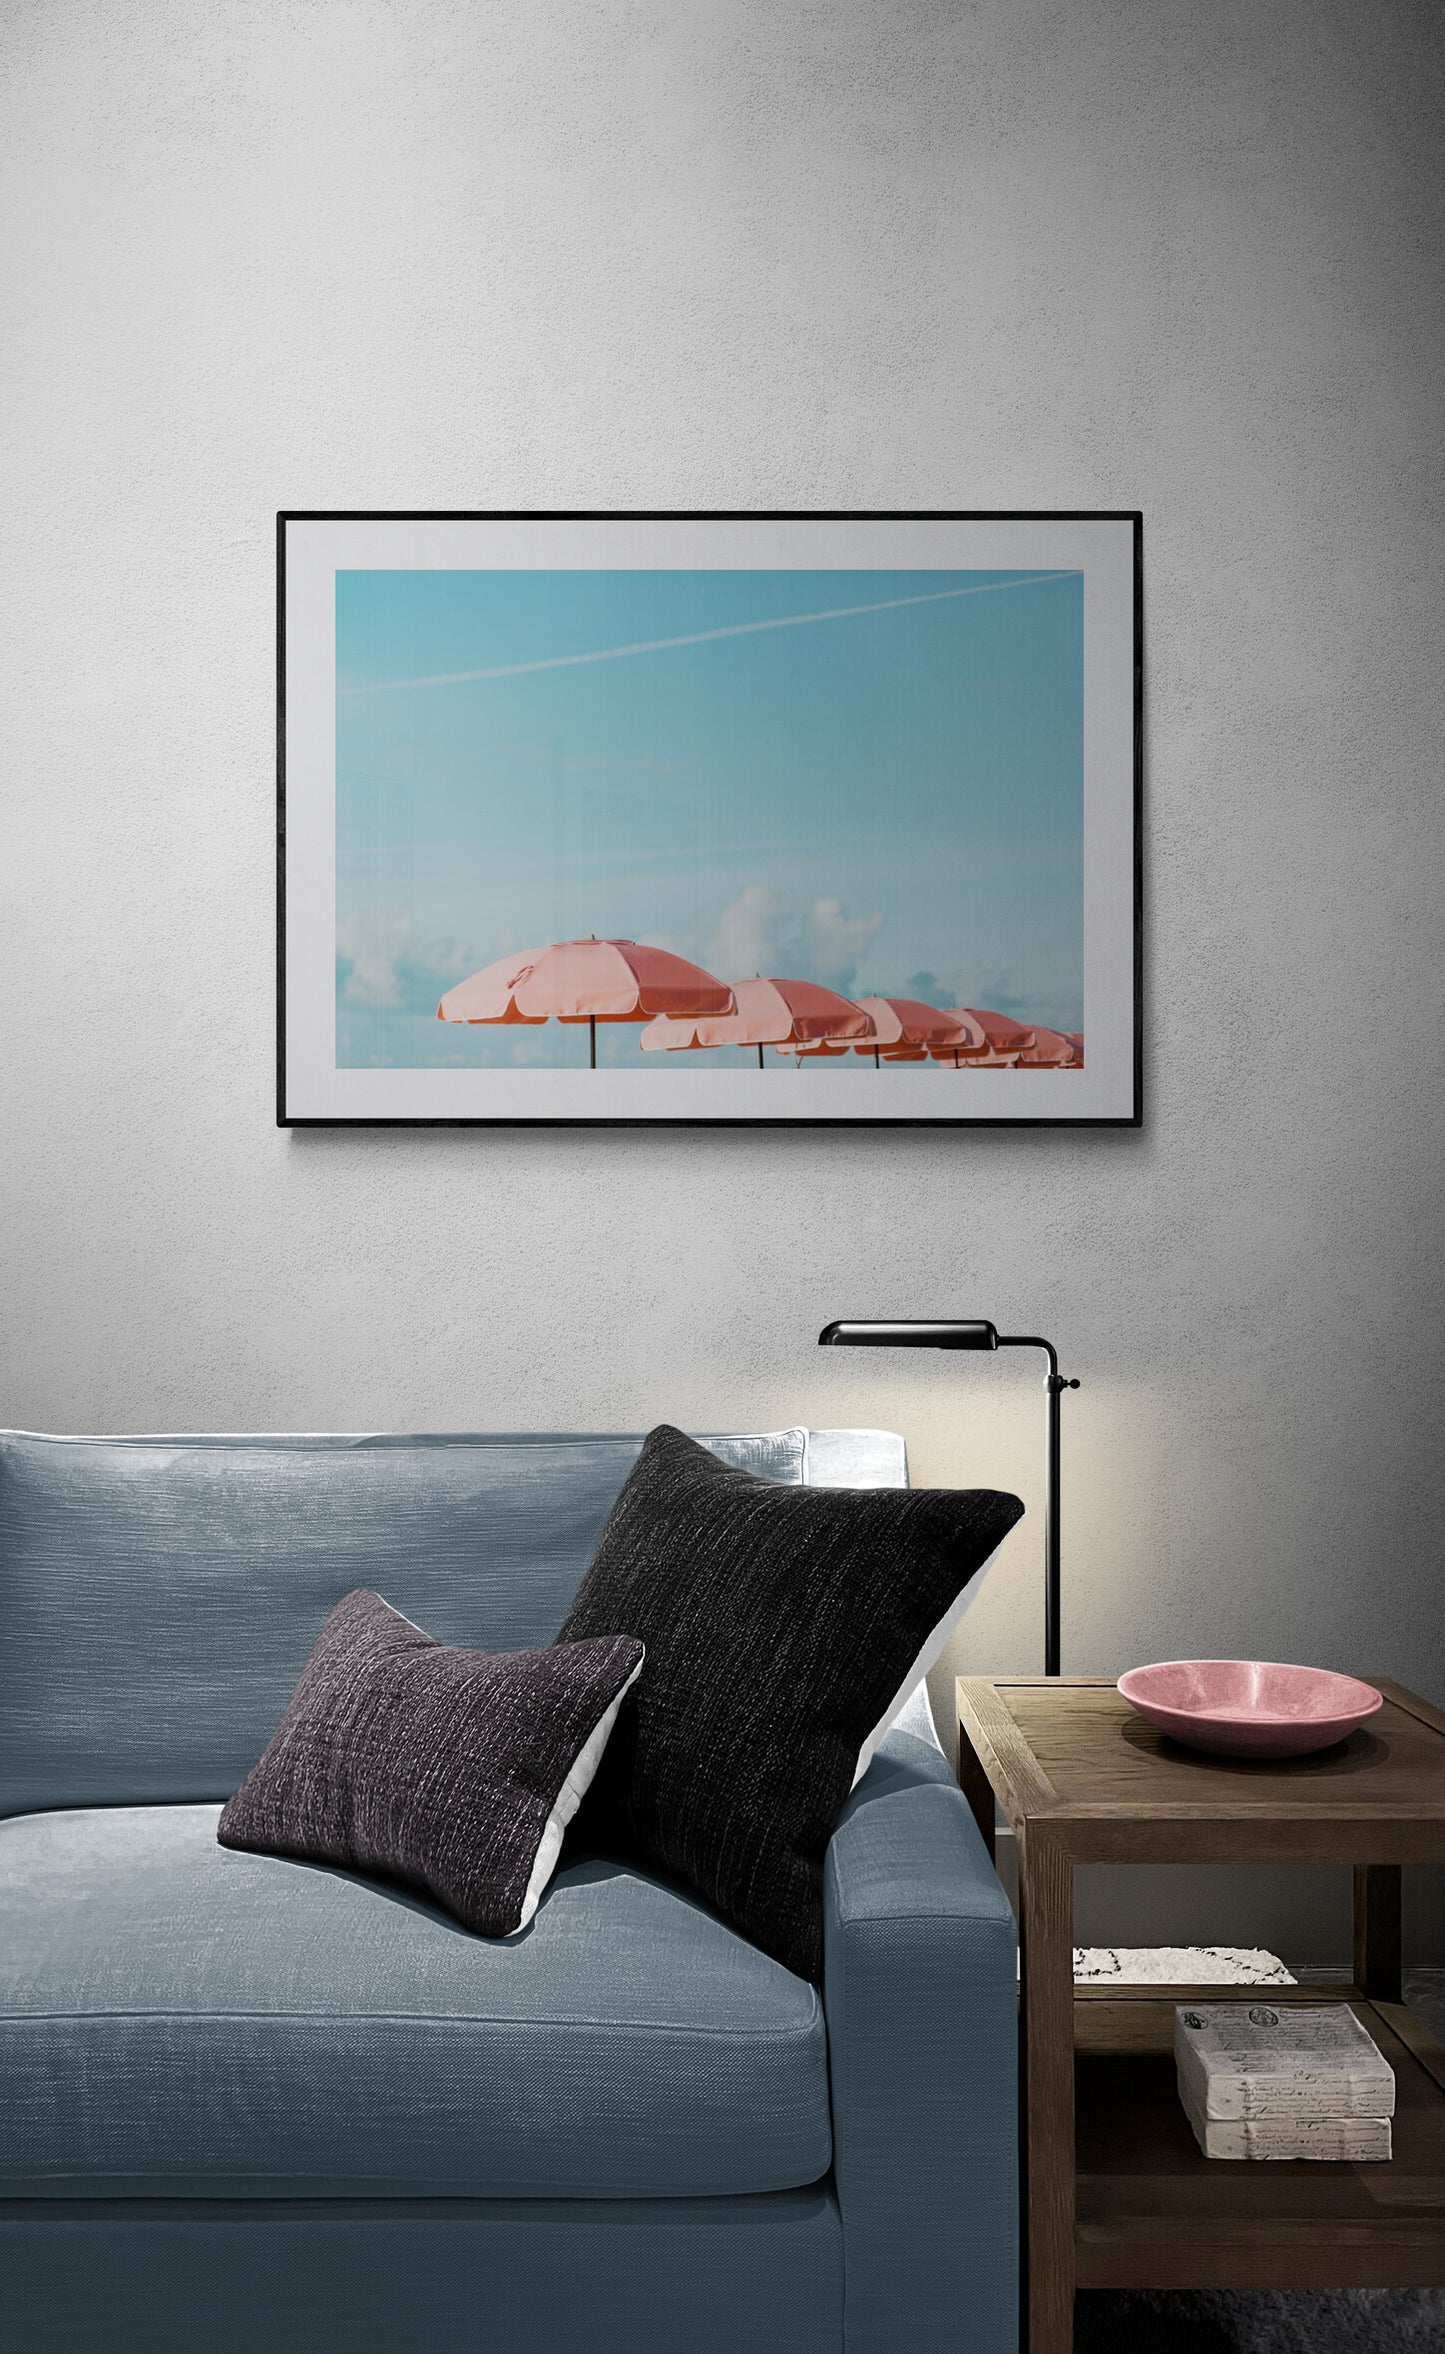 beach umbrellas photograph of turks and caicos in a living room as wall art